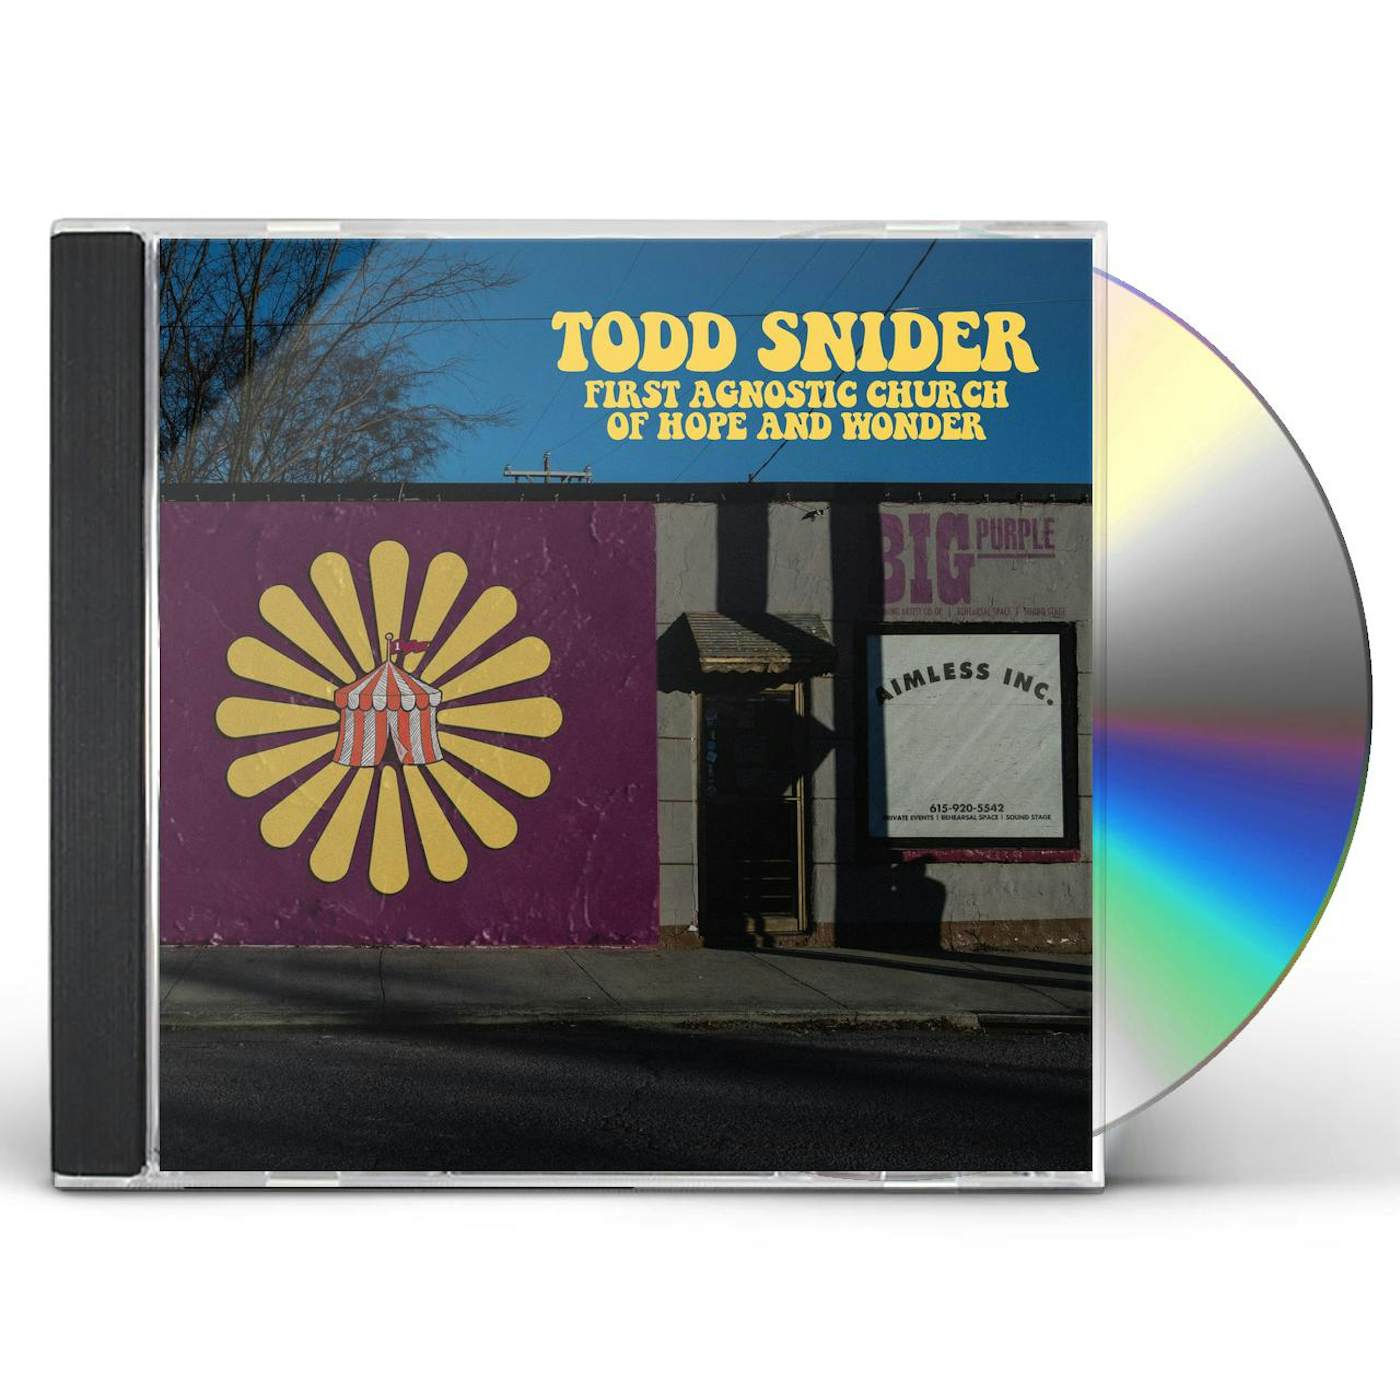 Todd Snider FIRST AGNOSTIC CHURCH OF HOPE AND WONDER CD